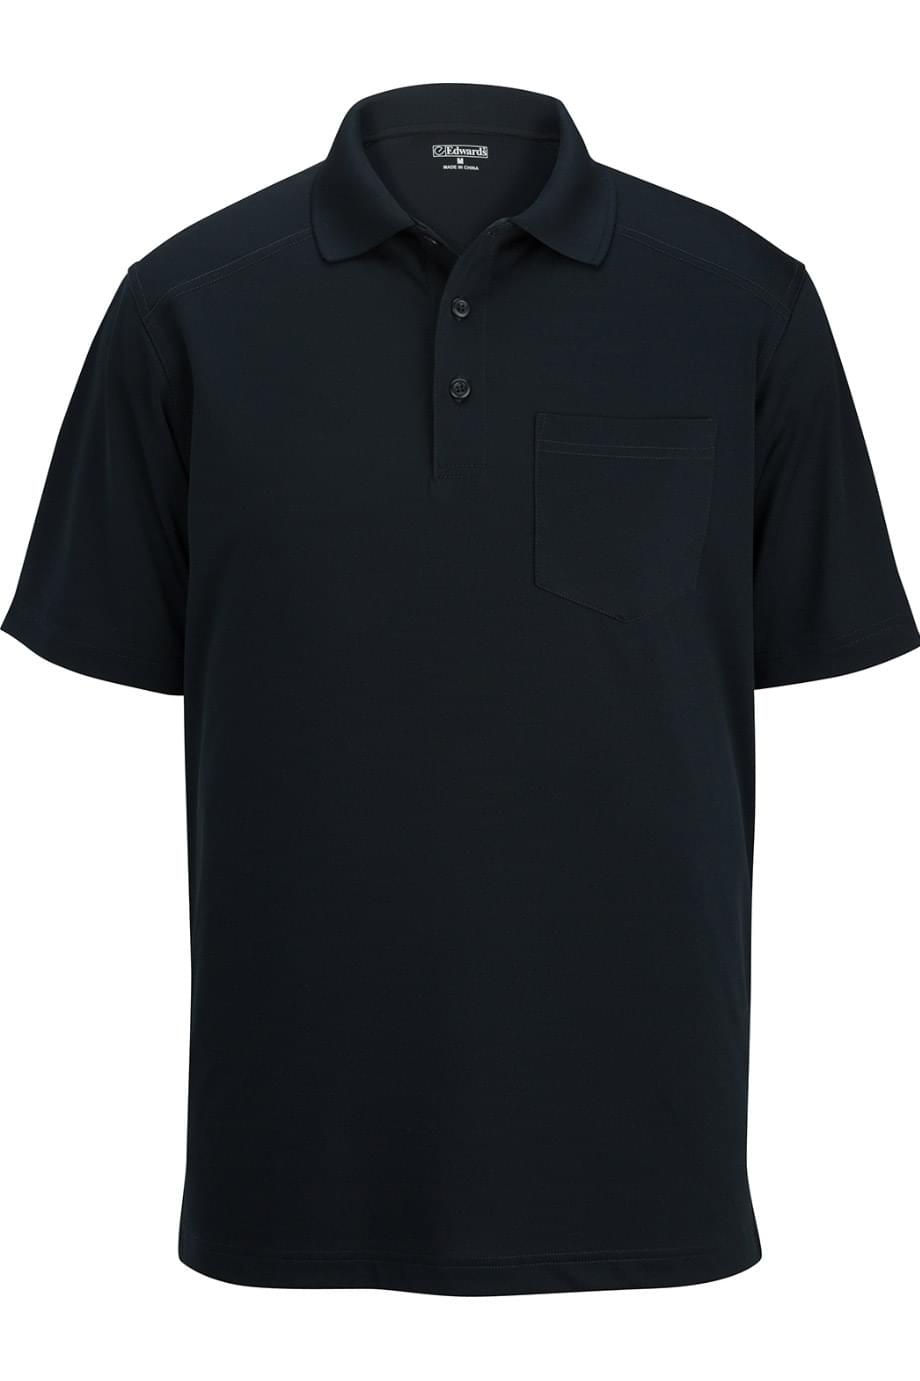 ULTIMATE SNAG-PROOF POLO WITH POCKET - ULTIMATE SNAG-PROOF POLO WITH POCKET